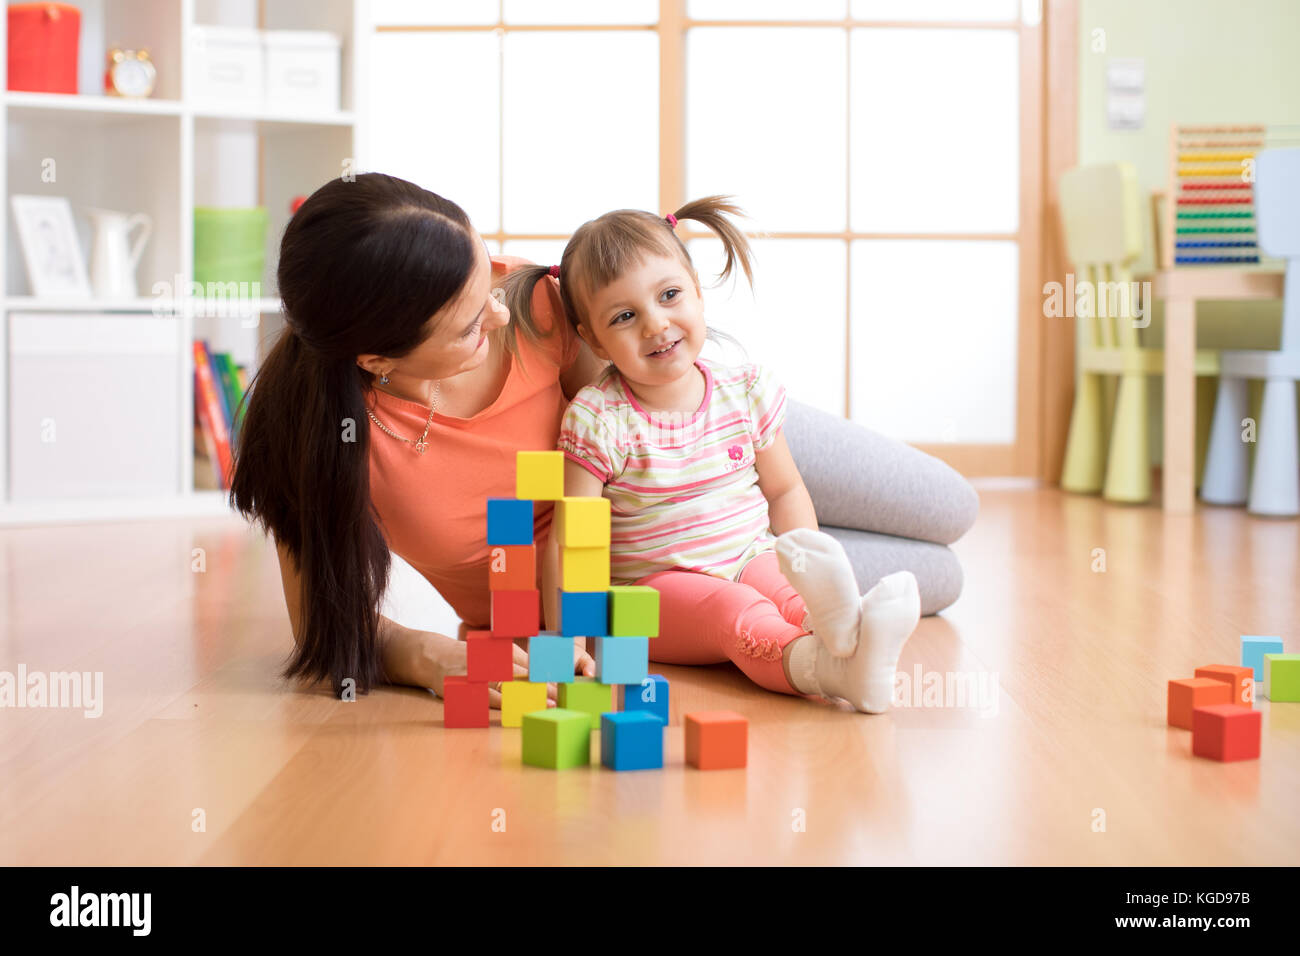 cute mother and child girl play with cubes together Stock Photo